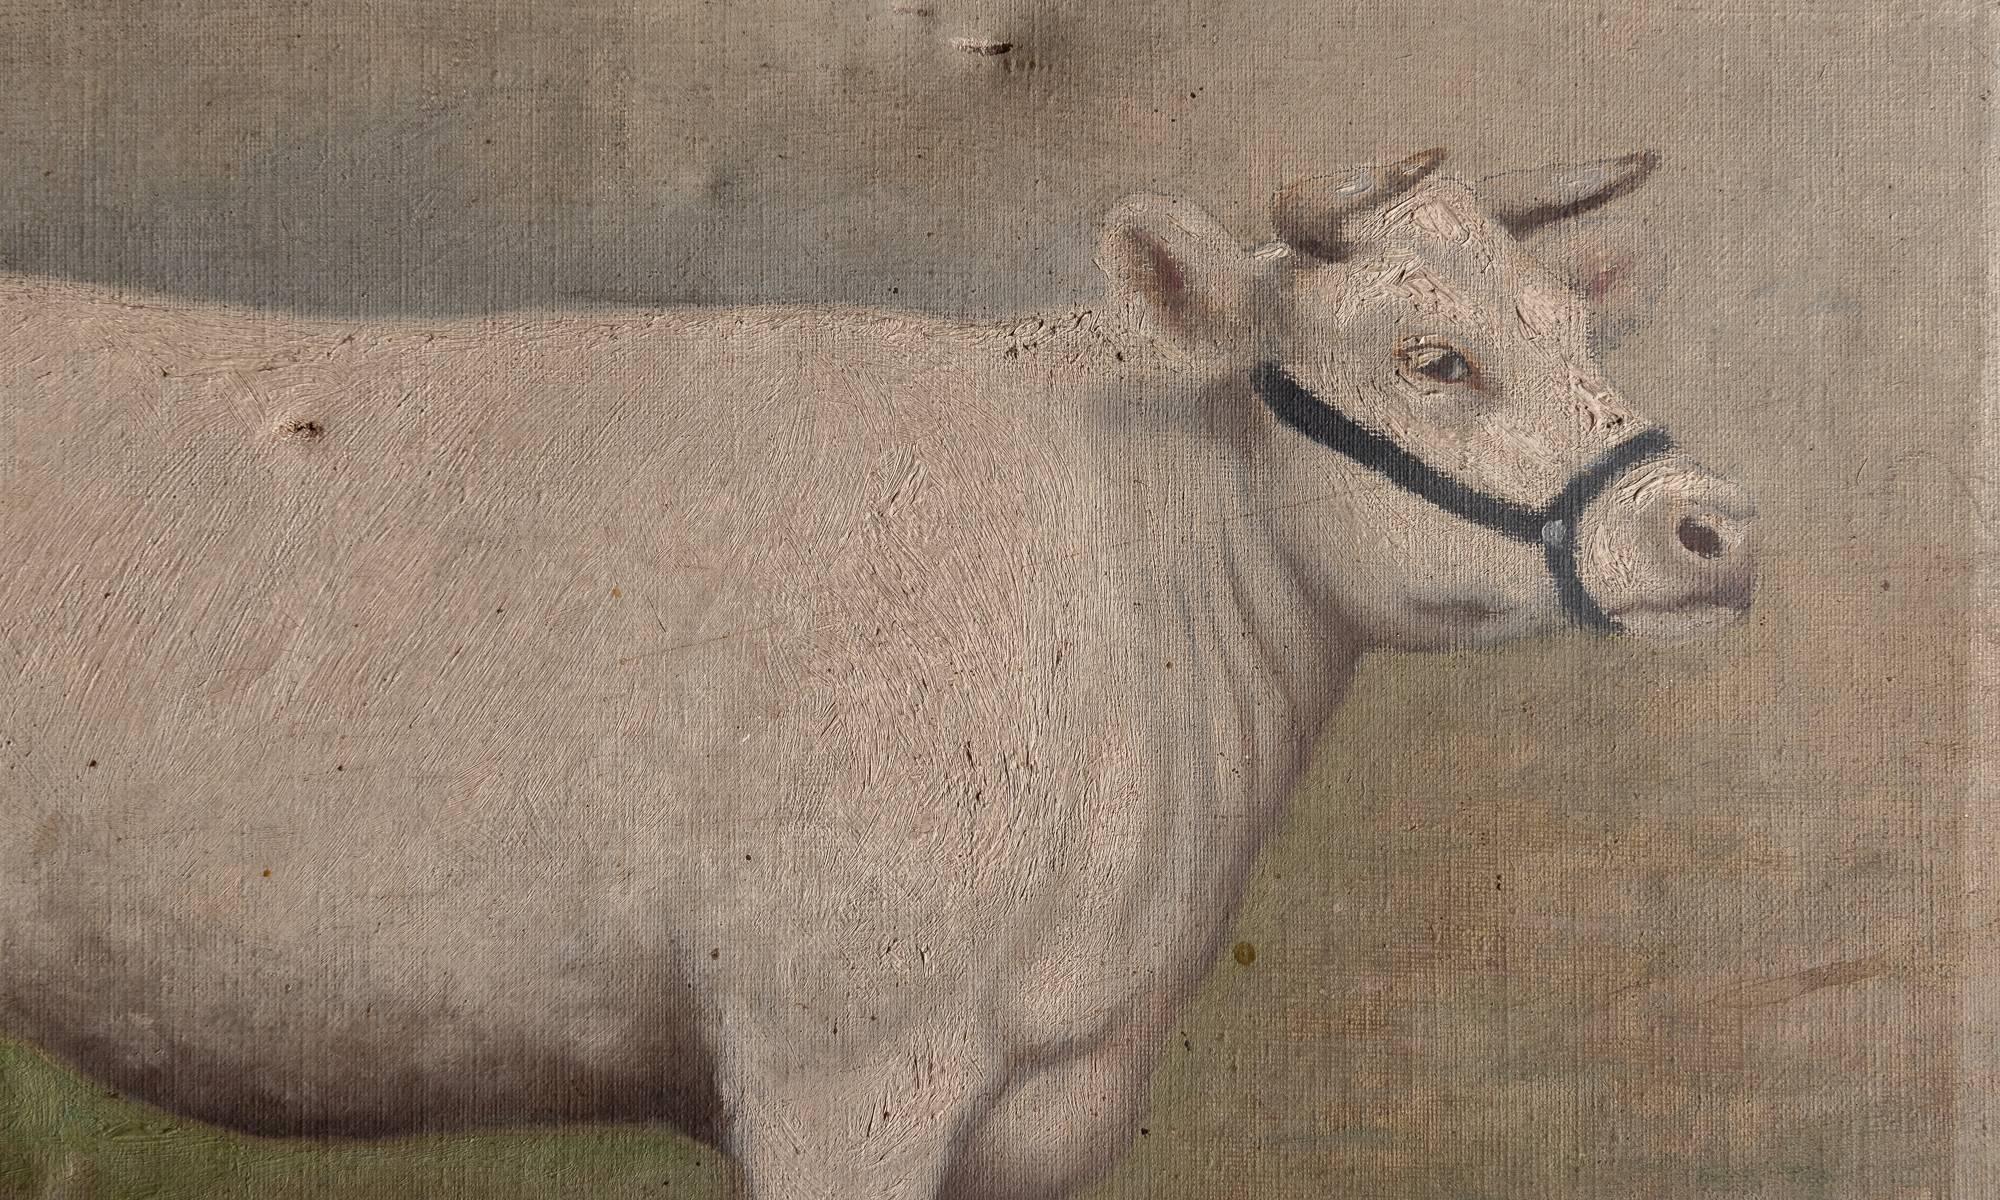 German Oil Painting of a Cow, 1913